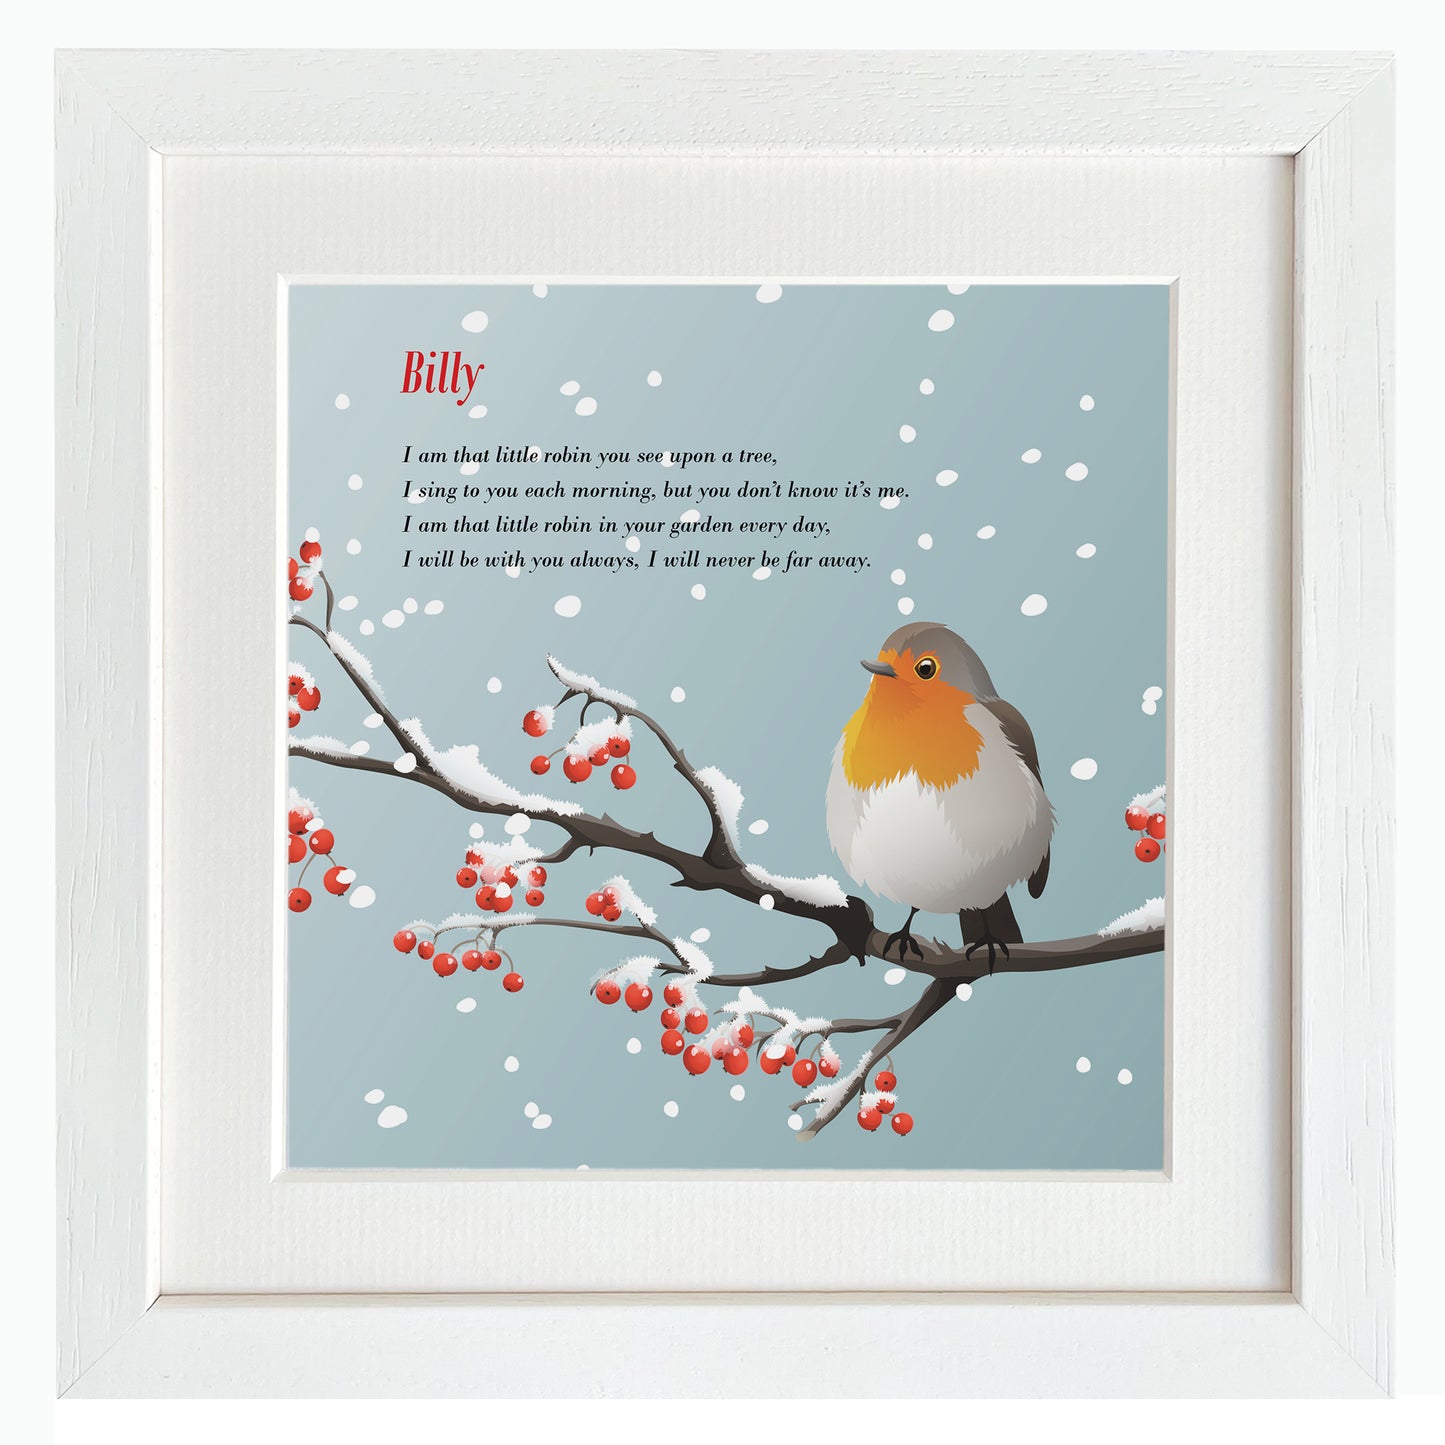 "I am that little robin" - personalised